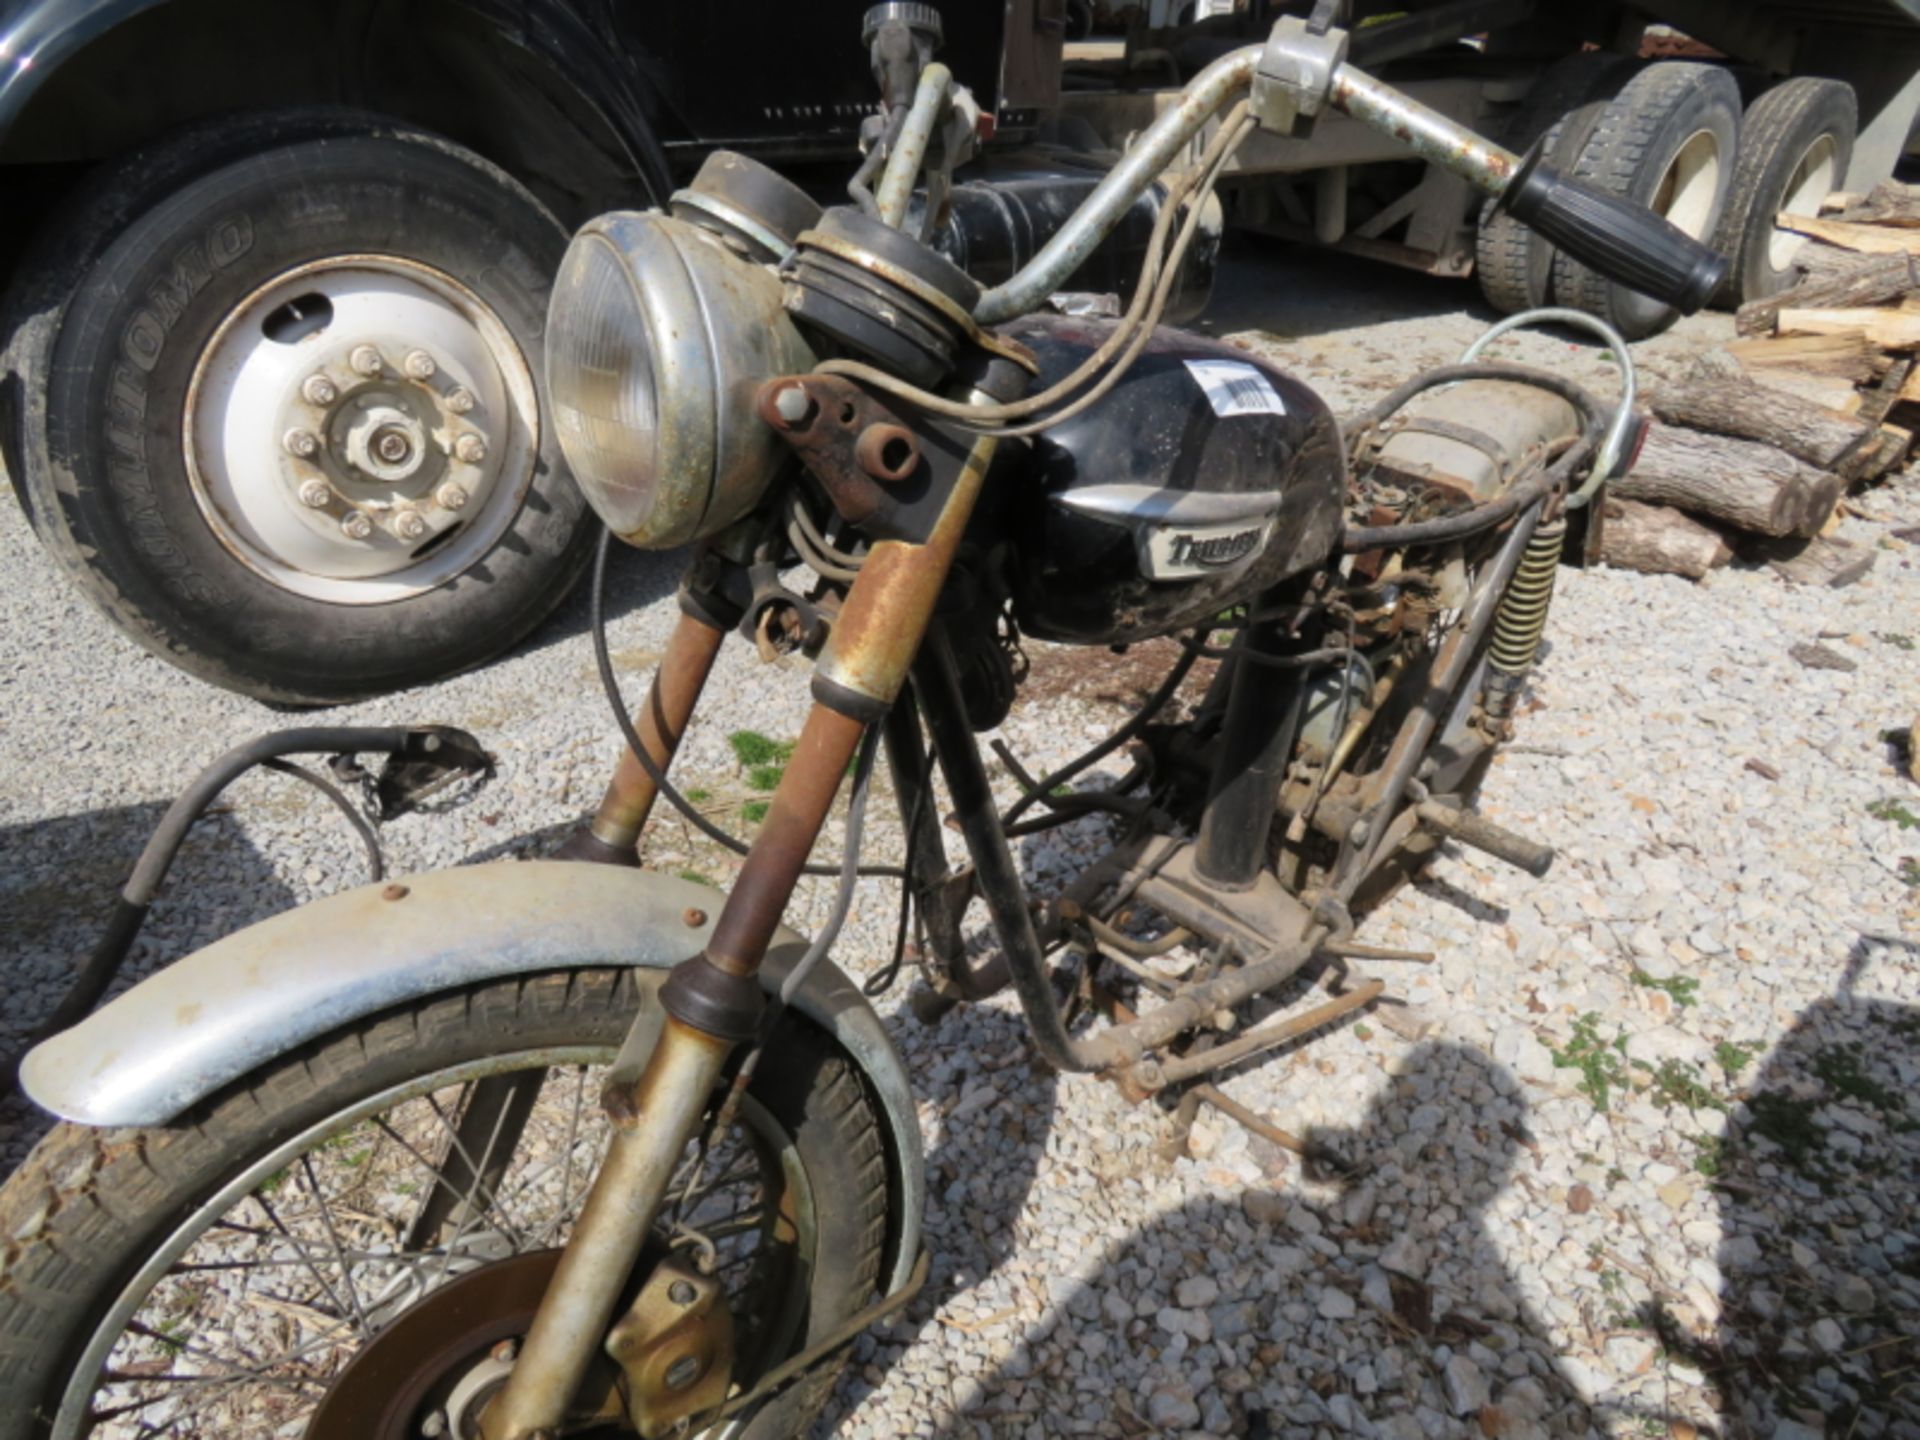 1977 Triumph 750 project bike, has engine and transmission, new valves several years ago, 13k miles - Image 2 of 5